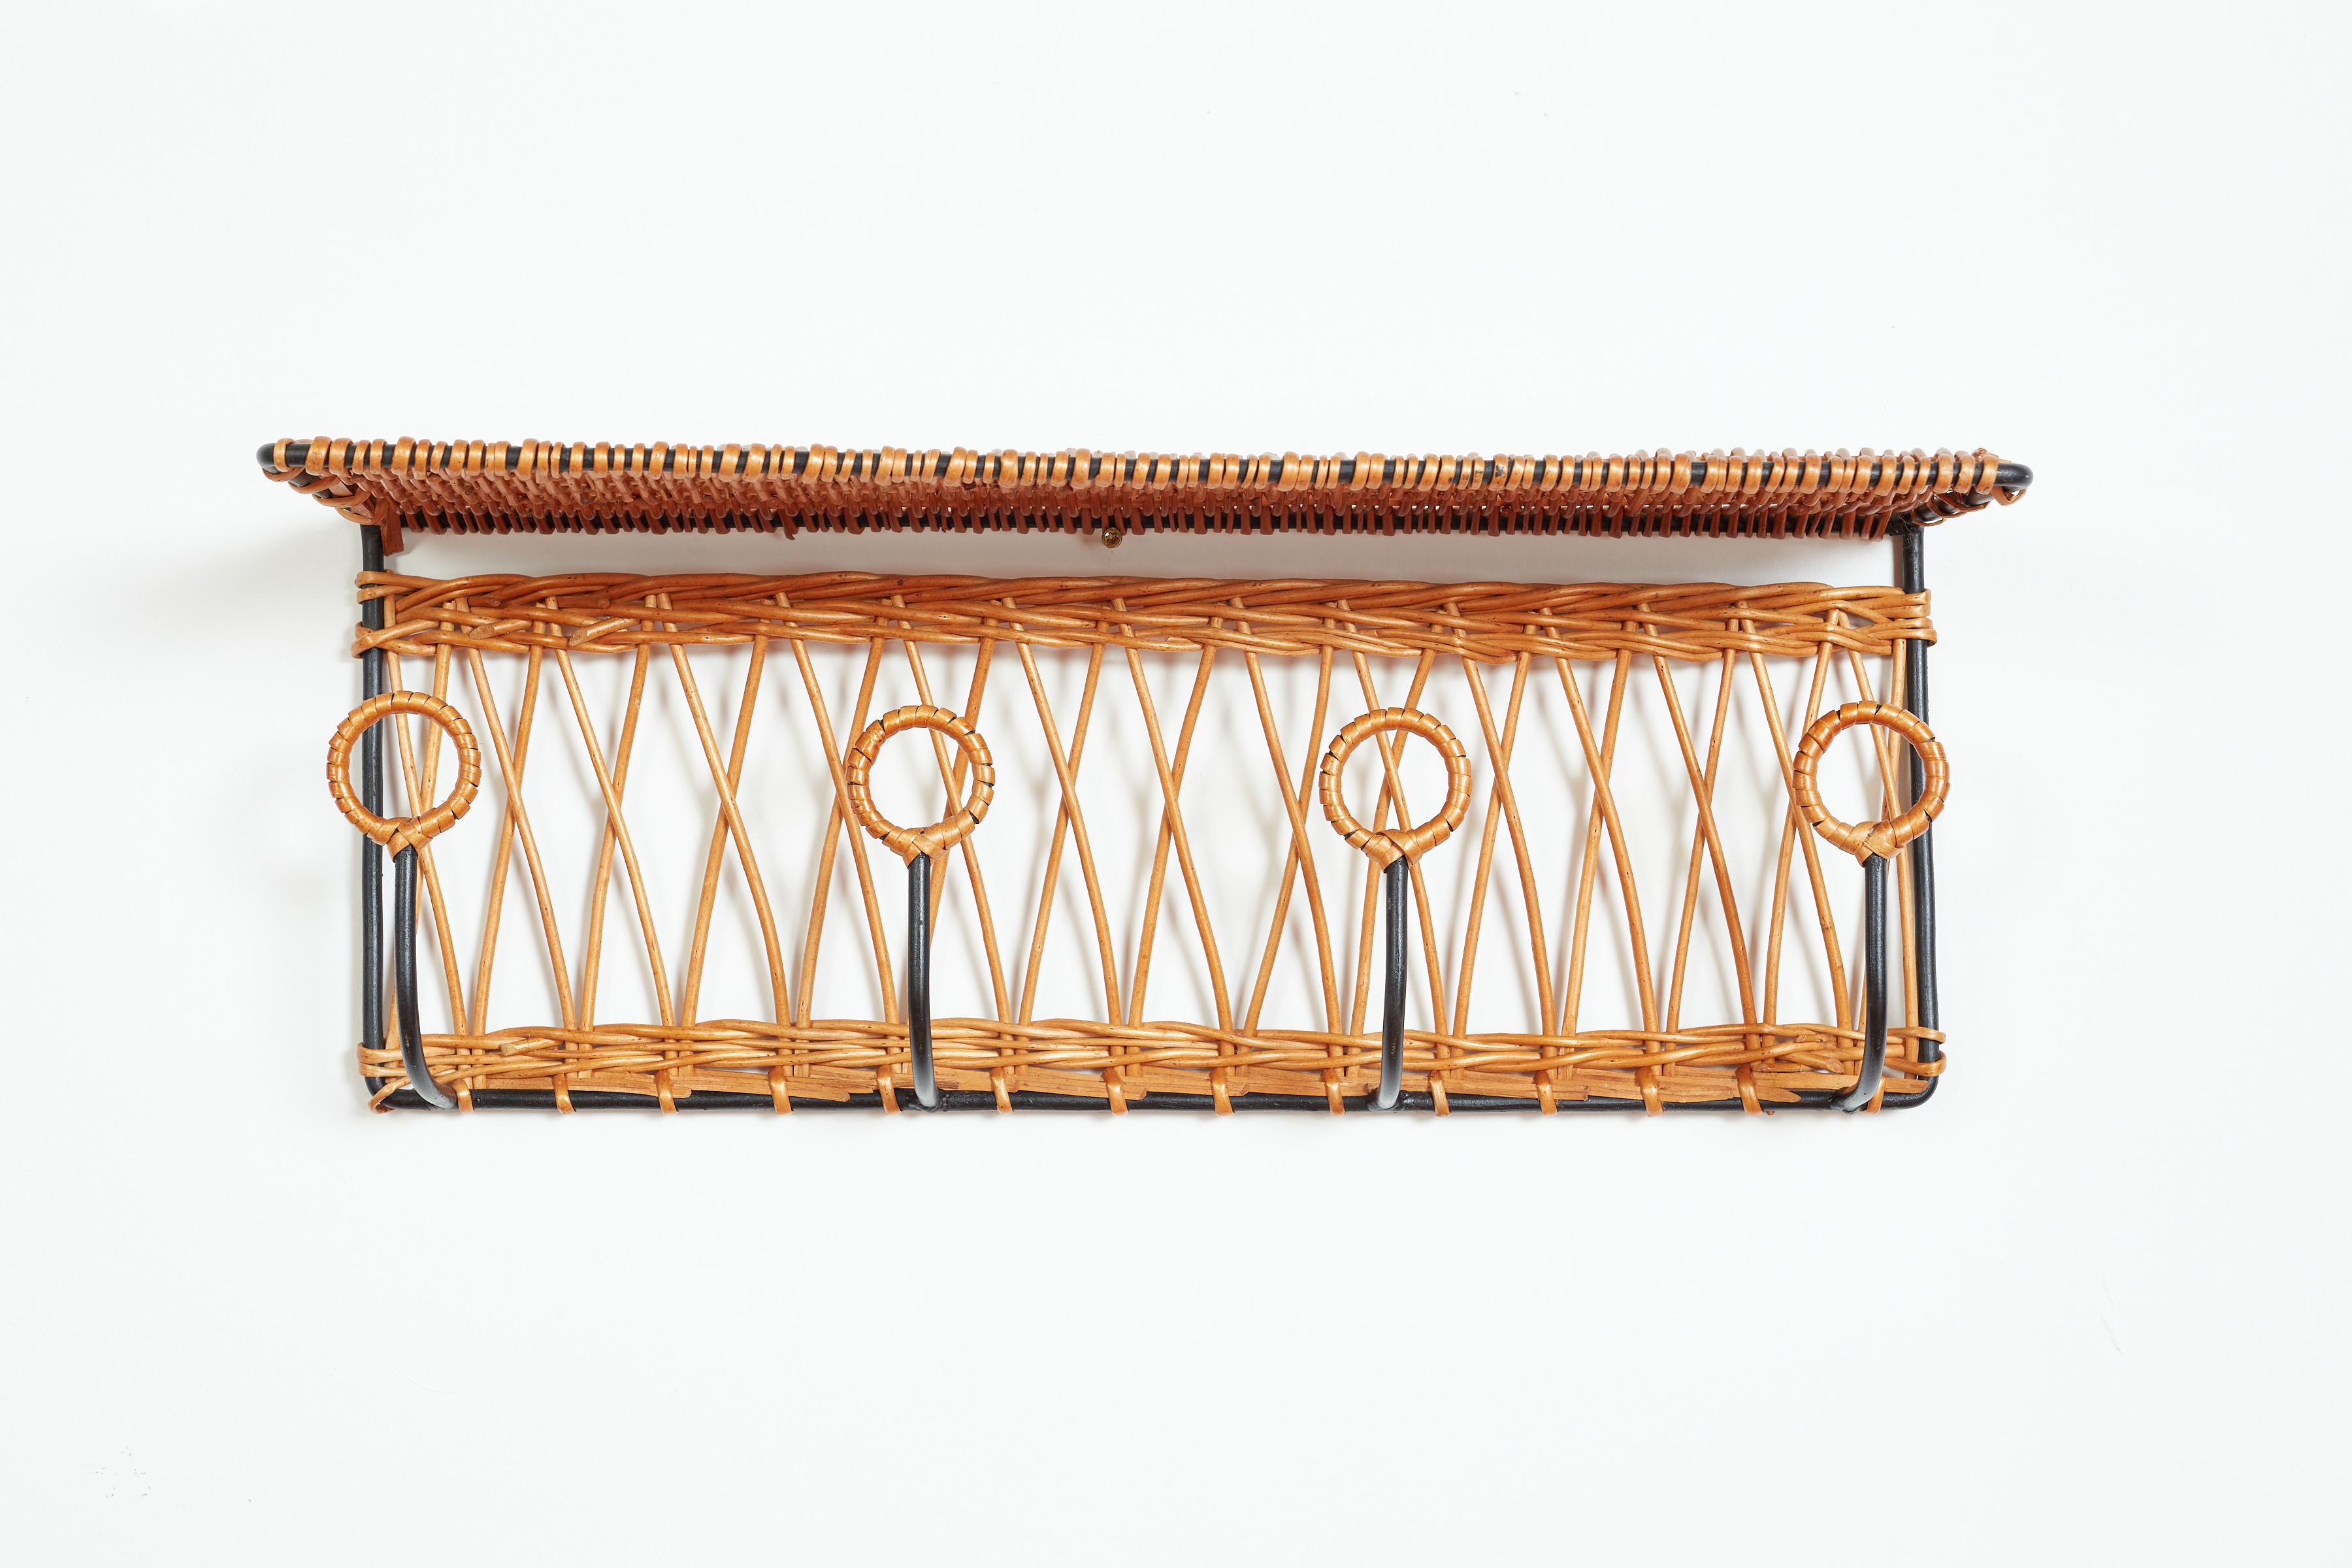 French coat rack attributed to Jacques Adnet made of iron and willow. Beautiful woven detail with 4 iron wrapped hooks and top shelf.